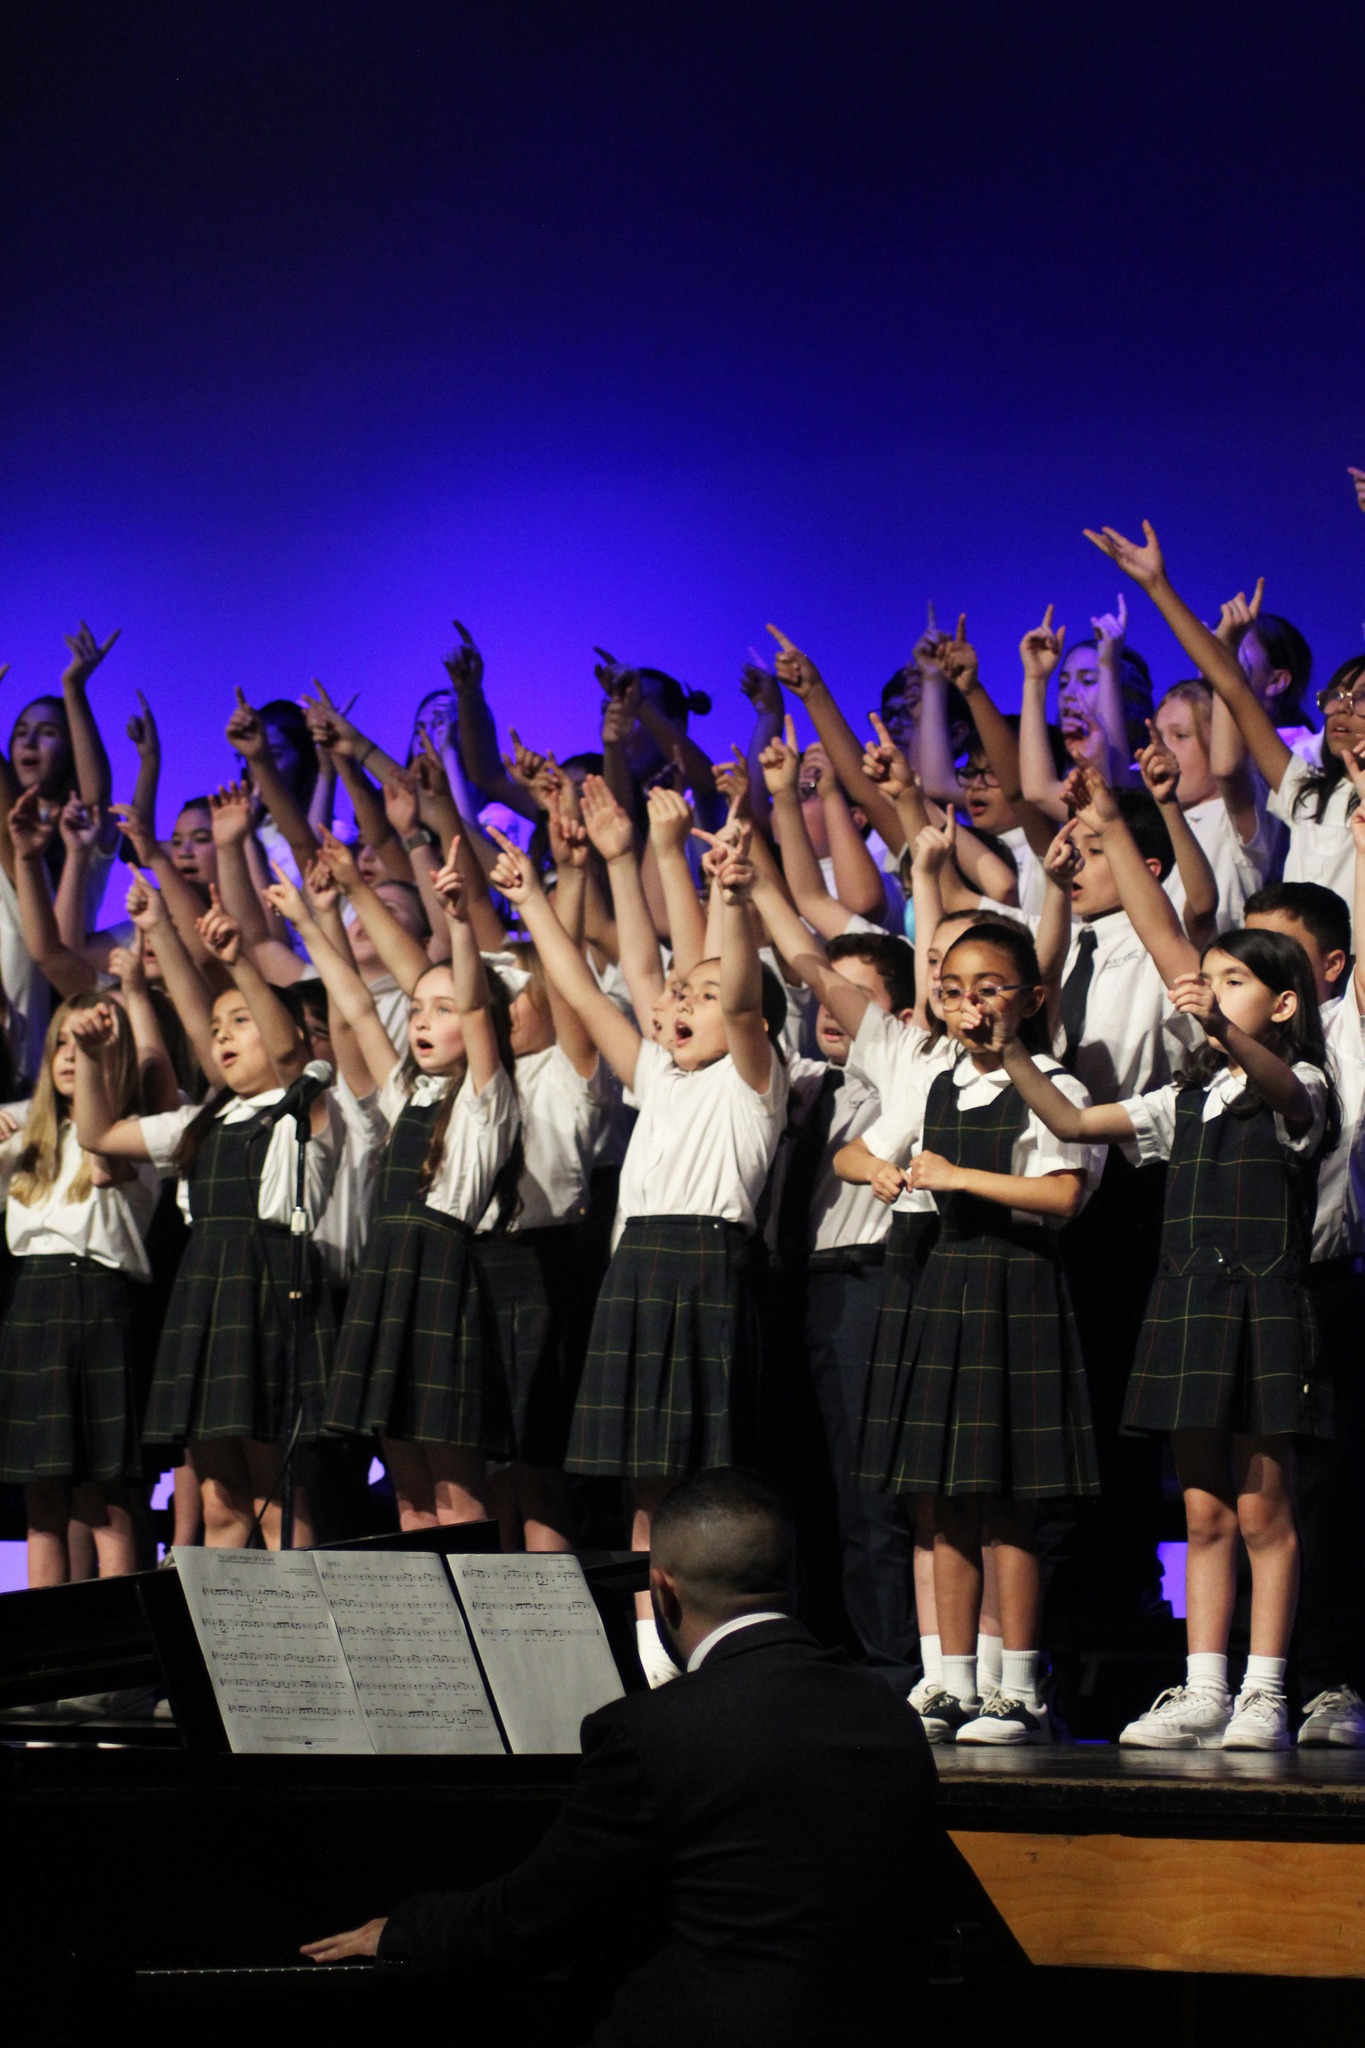 singing students with arms raised